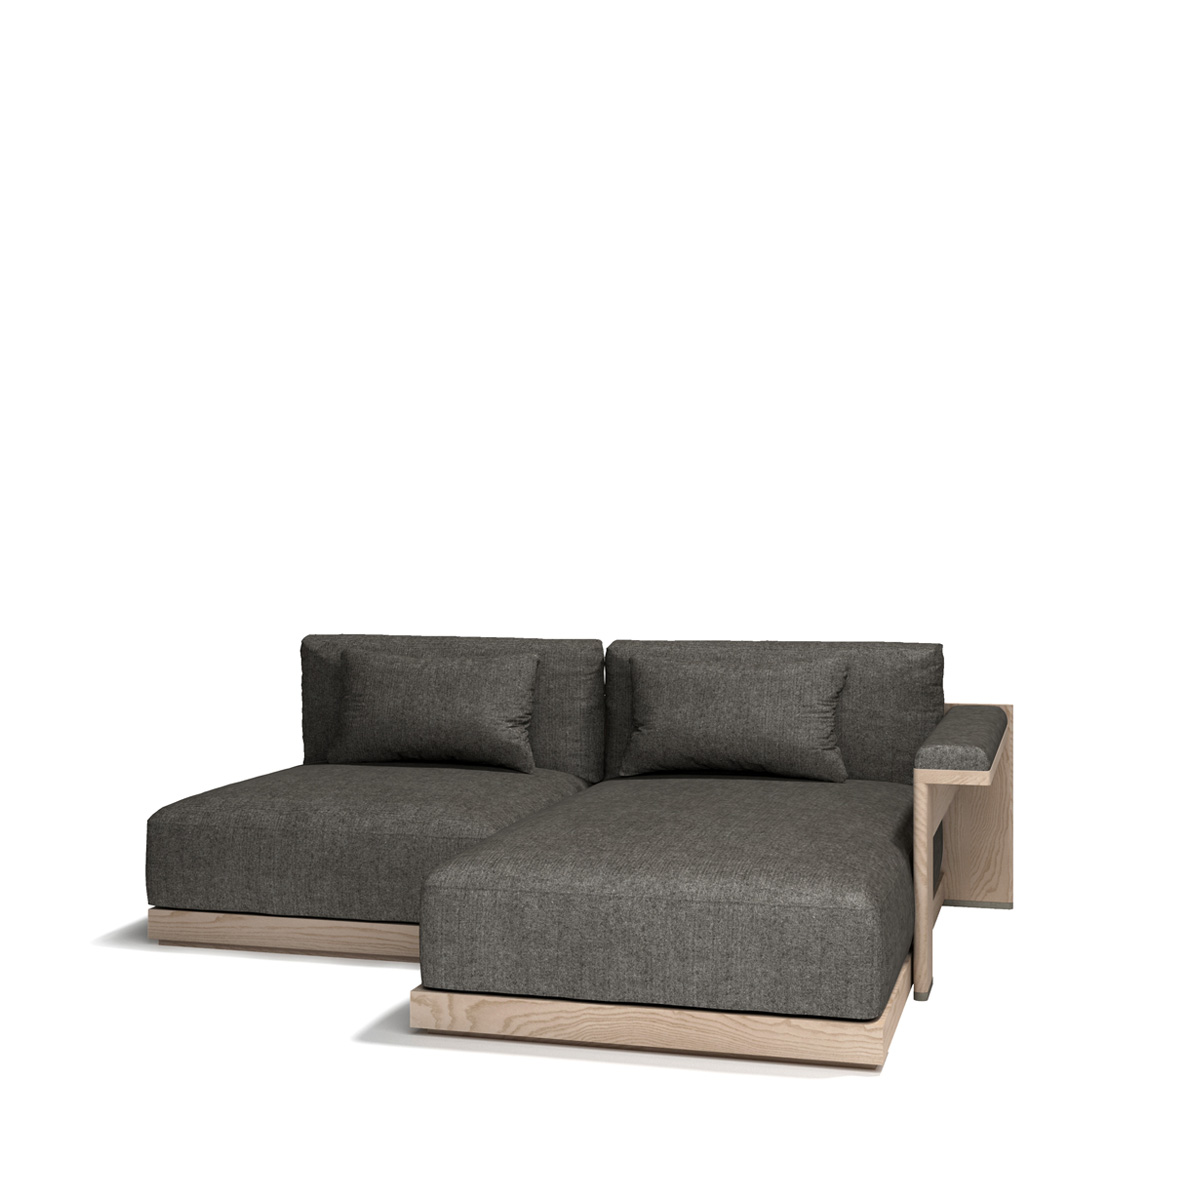 1-seater and right-chaise Jude